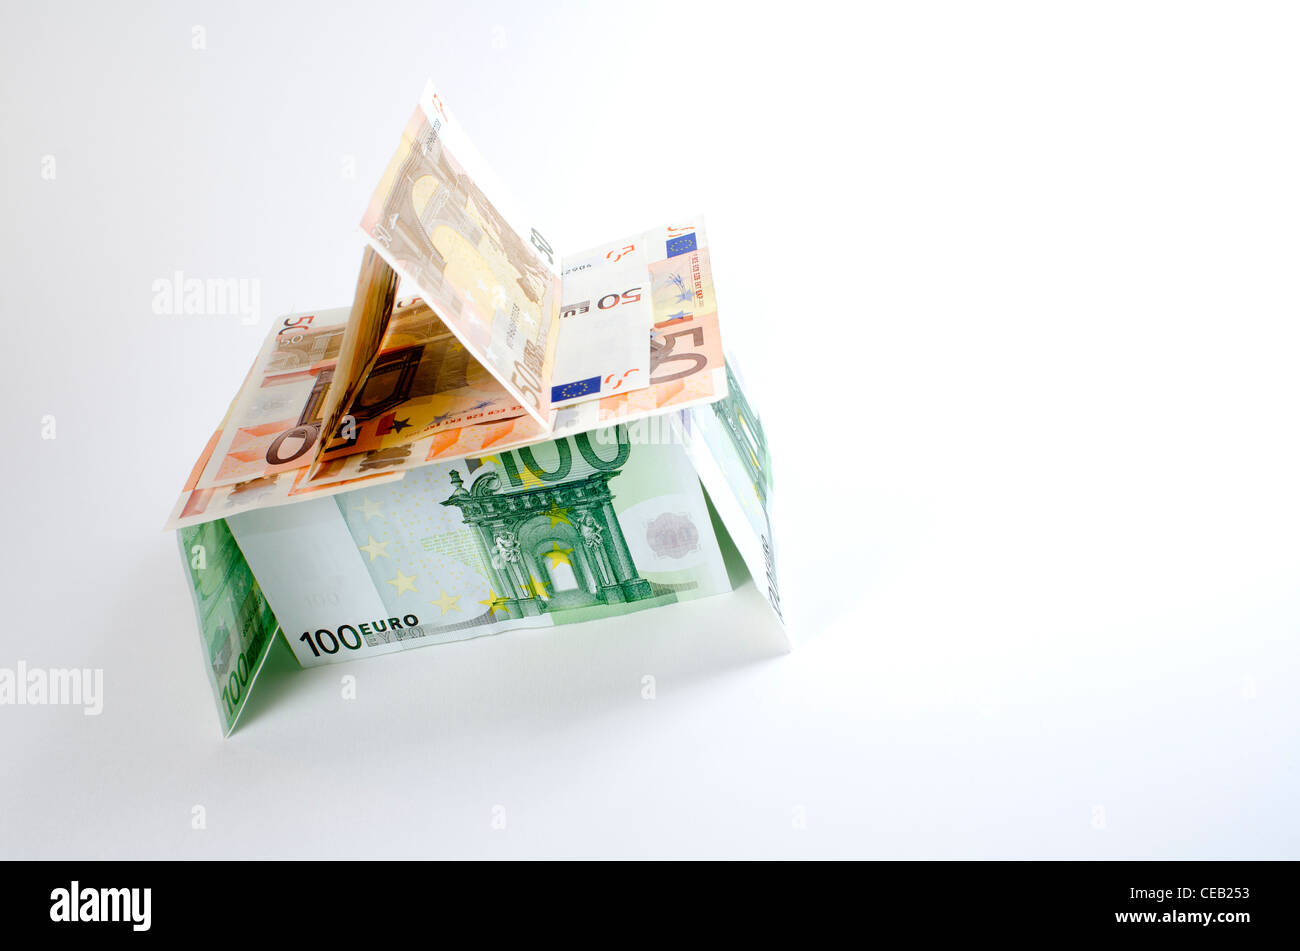 House made of Euro currency portraying the economic crisis and fragility in the eurozone during 2012. Stock Photo